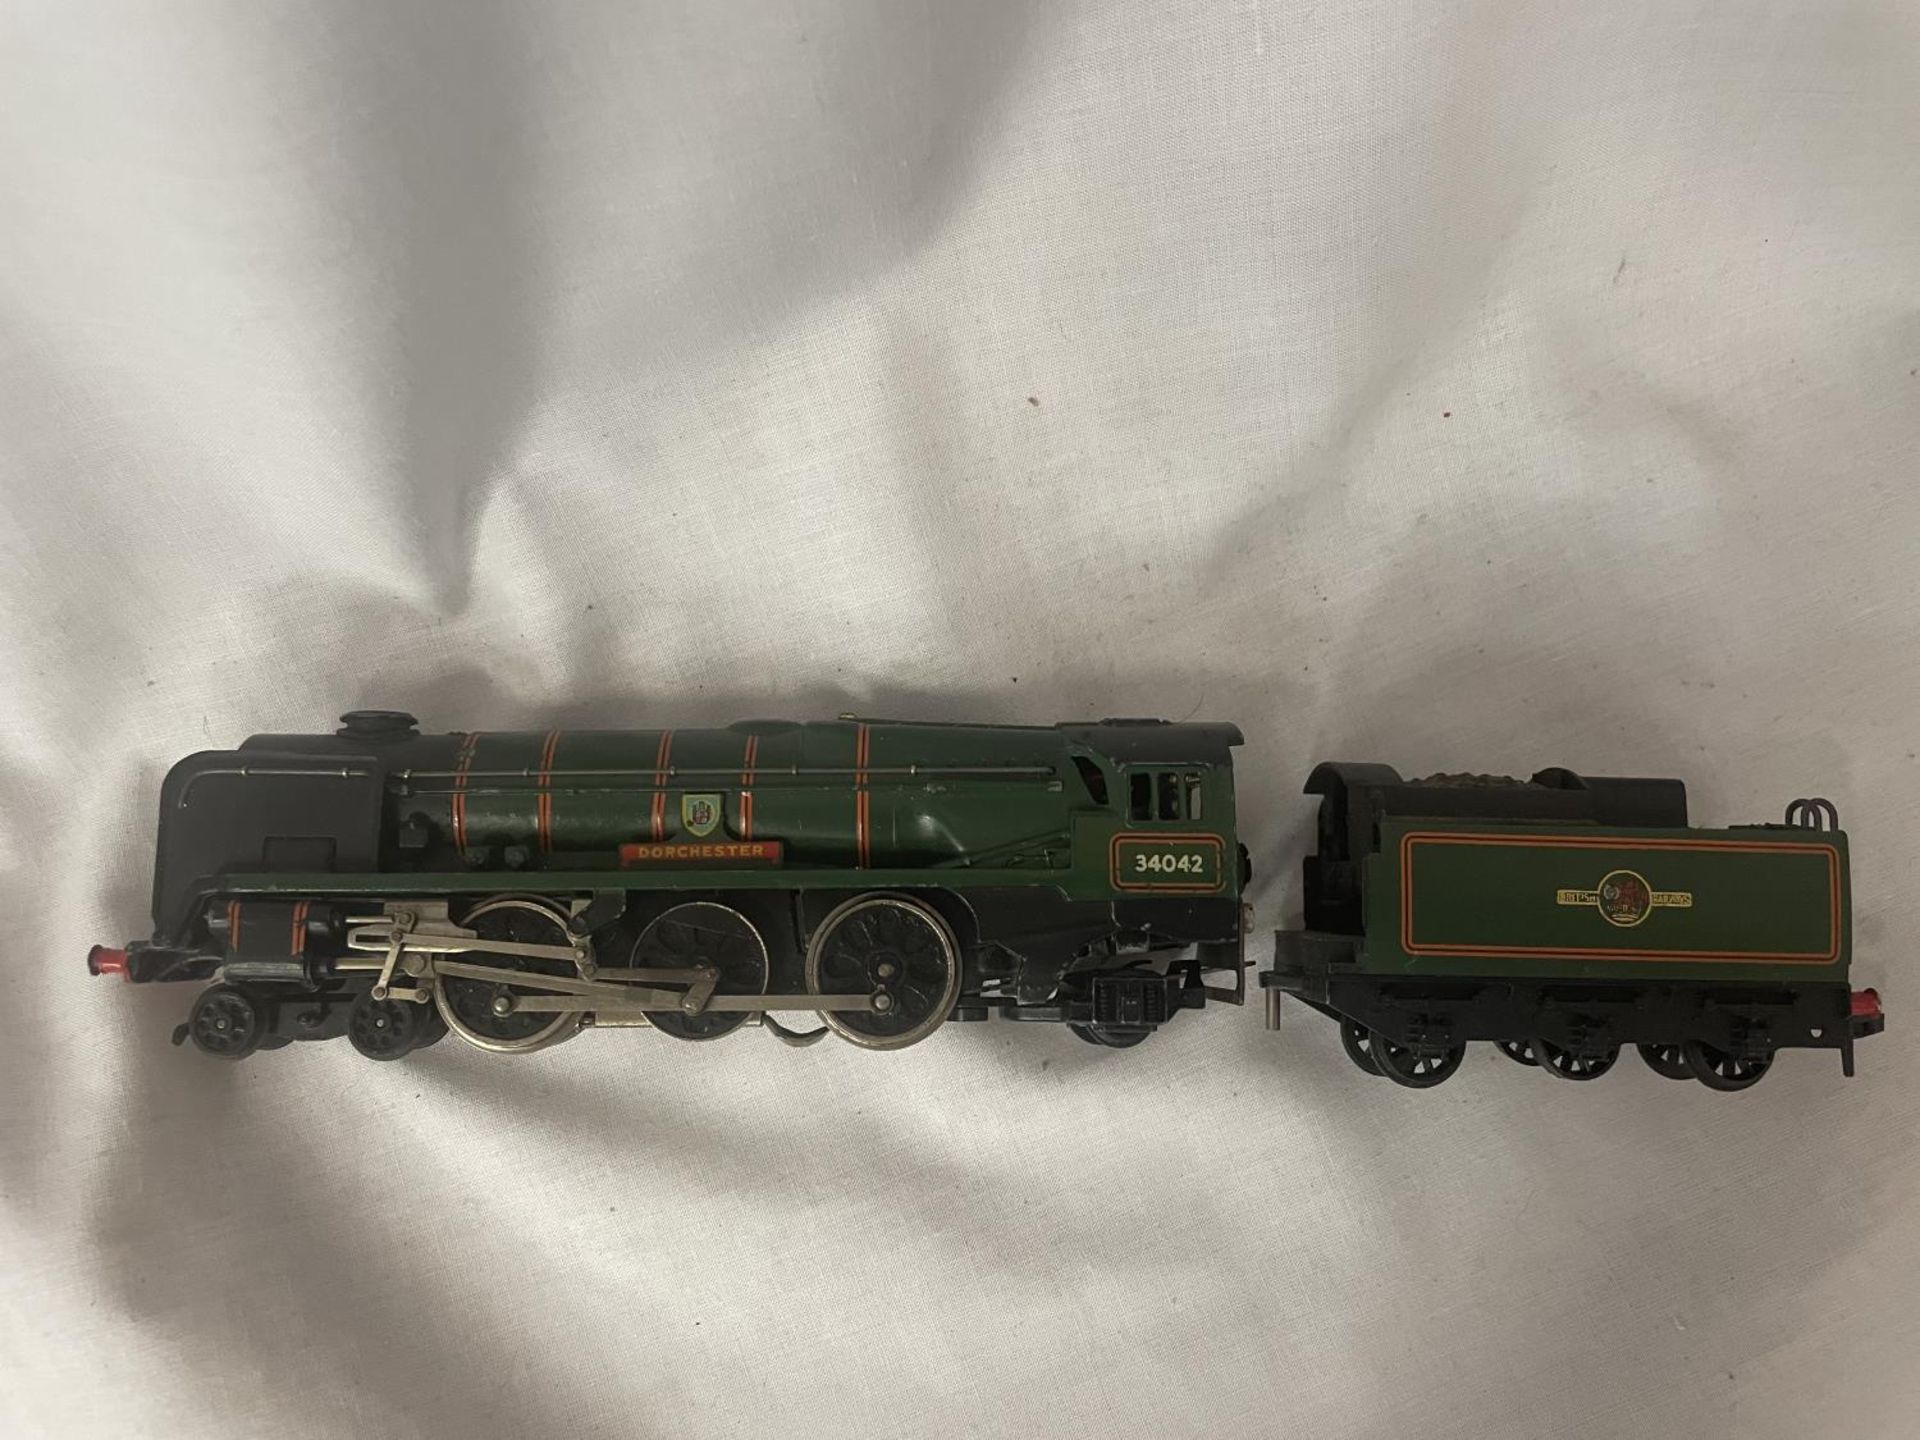 VARIOUS HORNBY DUBLO ITEMS - A 2-6-2 LOCOMOTIVE "DORCHESTER" AND TENDER, A NUMBER 133 CRANE, - Image 2 of 9